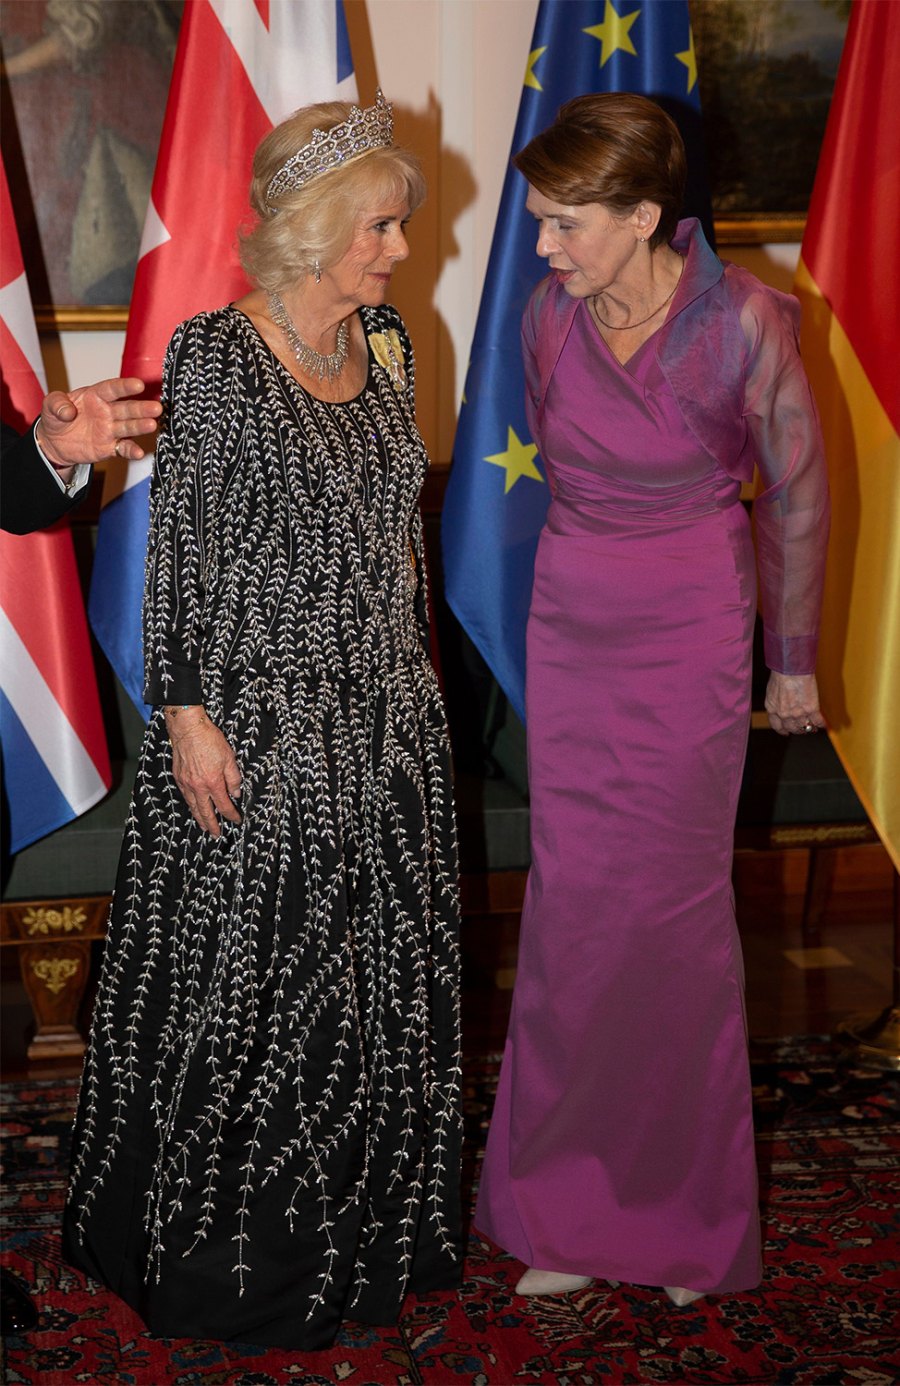 Queen Consort Camilla Wears Tiara, Queen's Jewels at Germany State Banquet